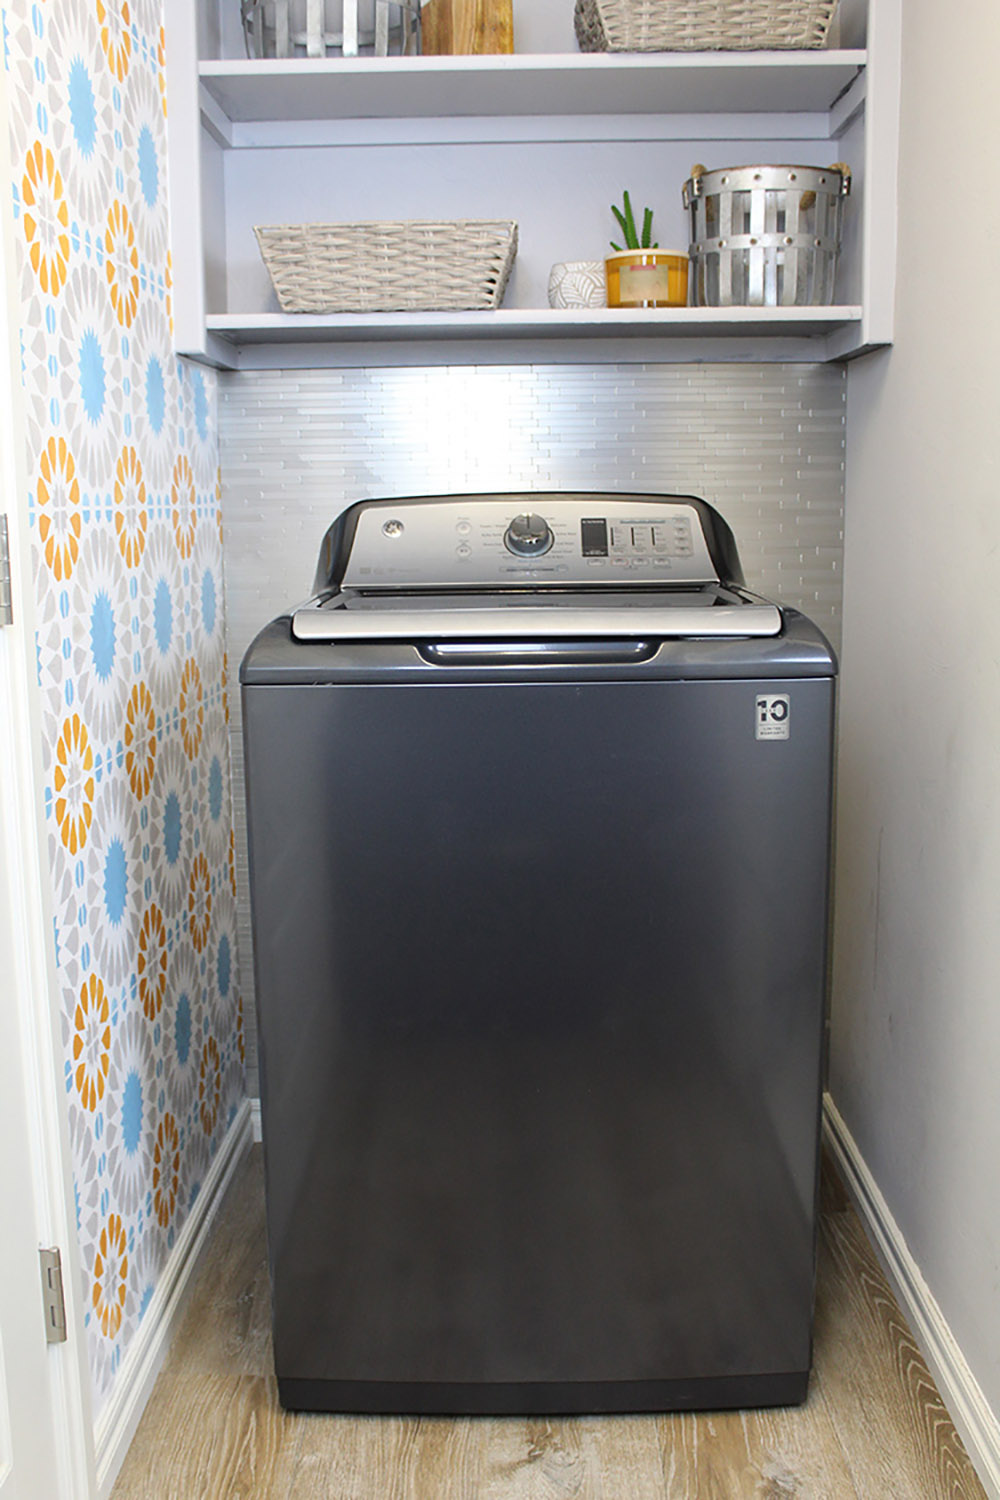 A gray GE washing machine in front of a wall of metal backsplash.